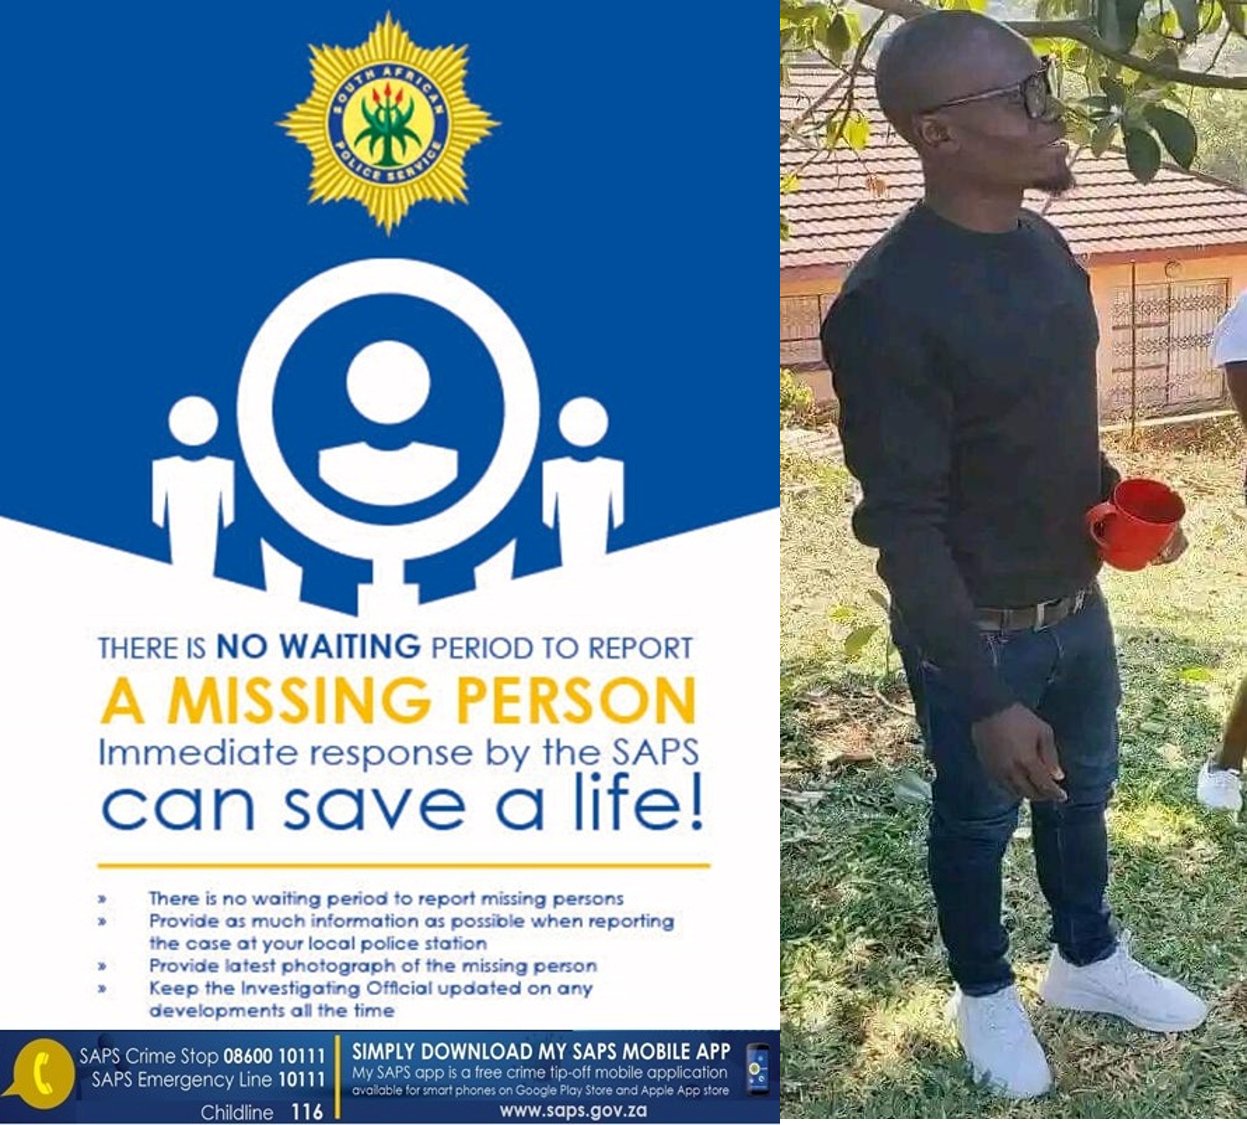 Police in Thohoyandou requires public assistance in locating a missing man